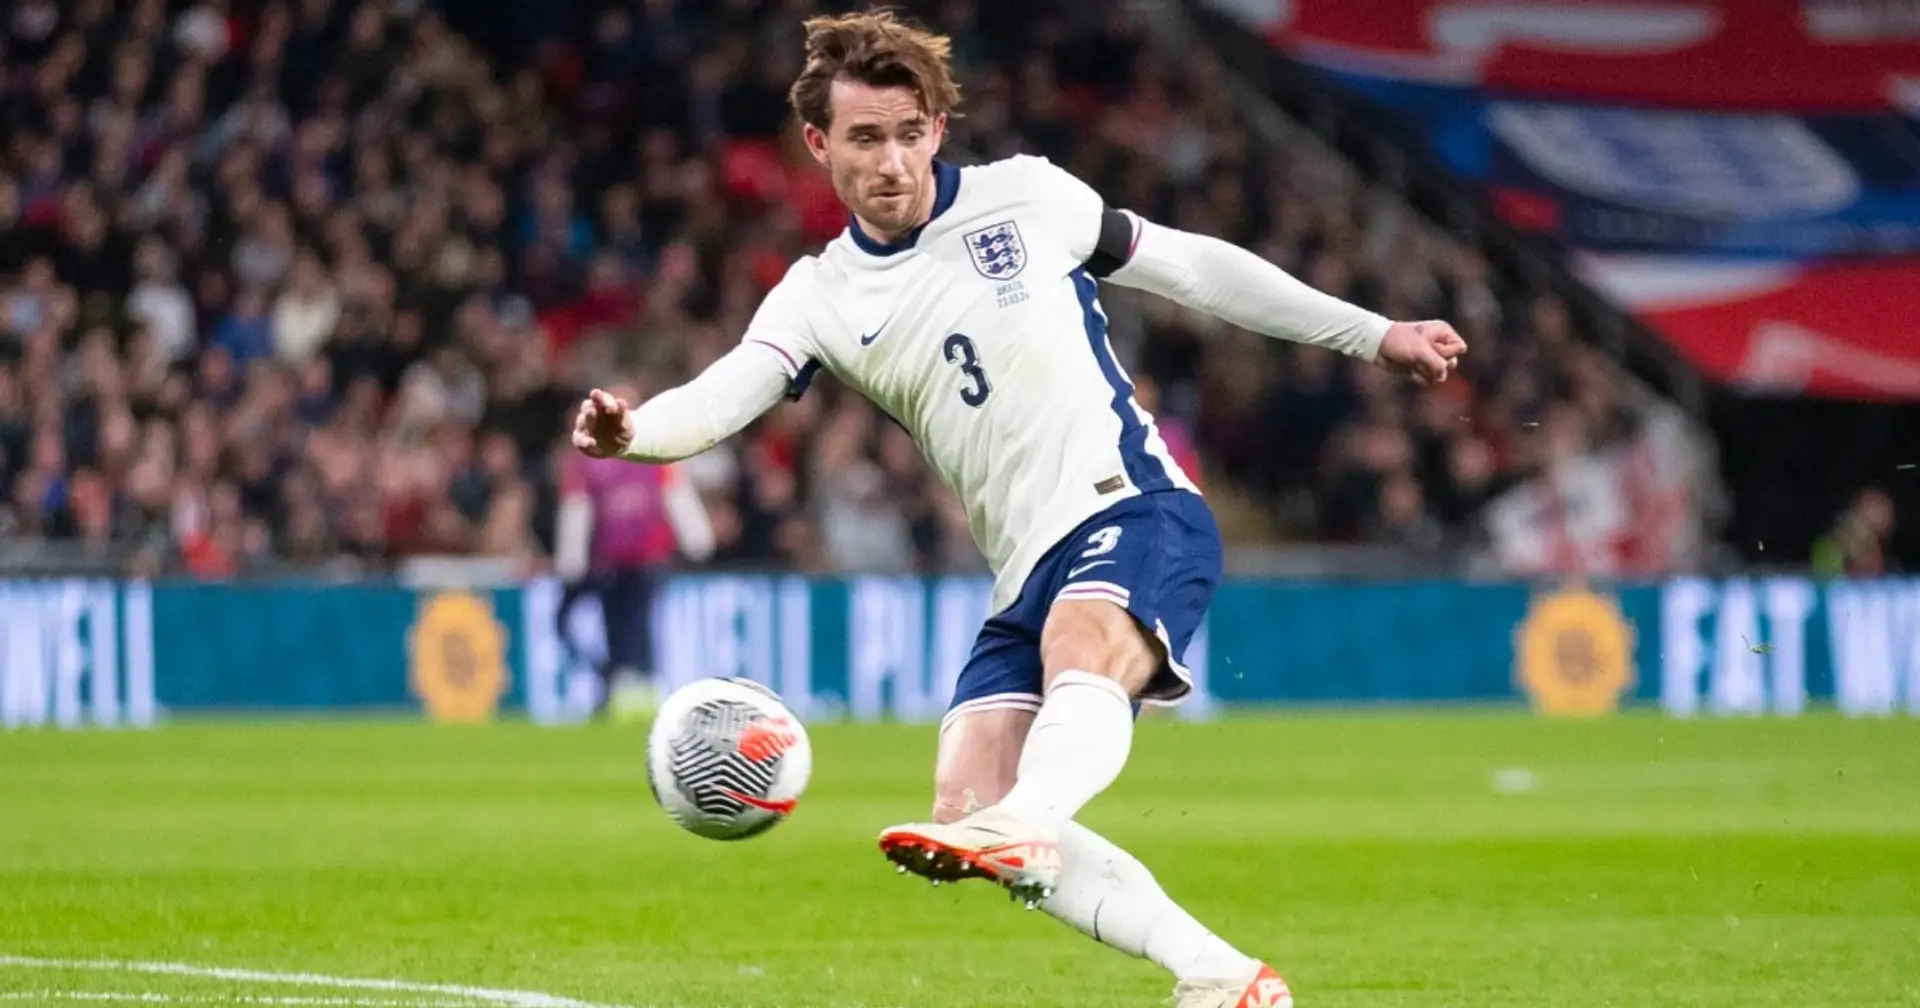 Ben Chilwell expected to start for England against Belgium: Sky Sports